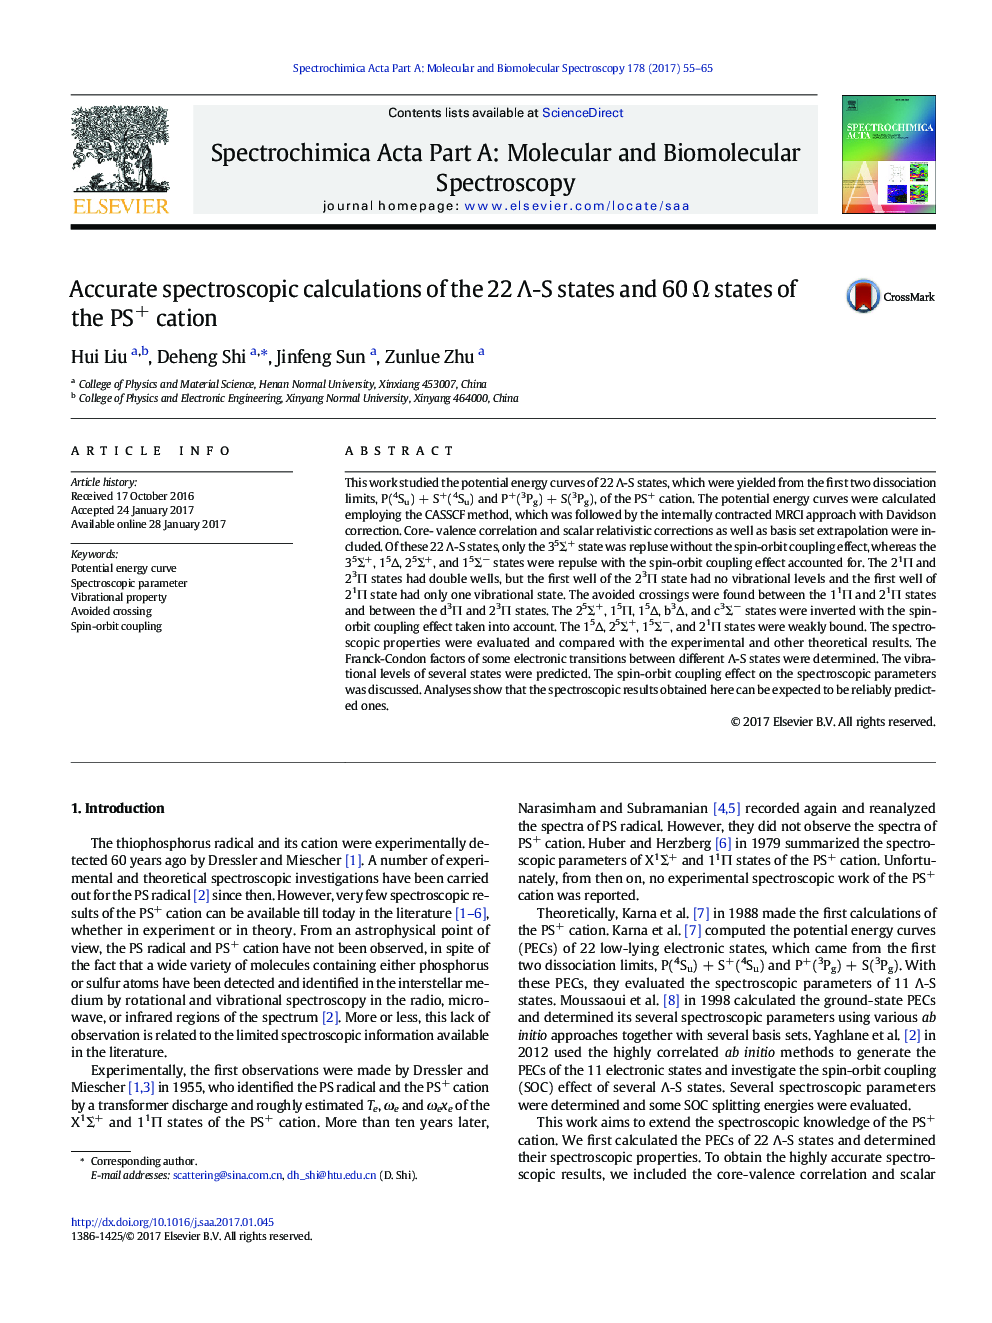 Accurate spectroscopic calculations of the 22 Î-S states and 60Â Î© states of the PS+ cation